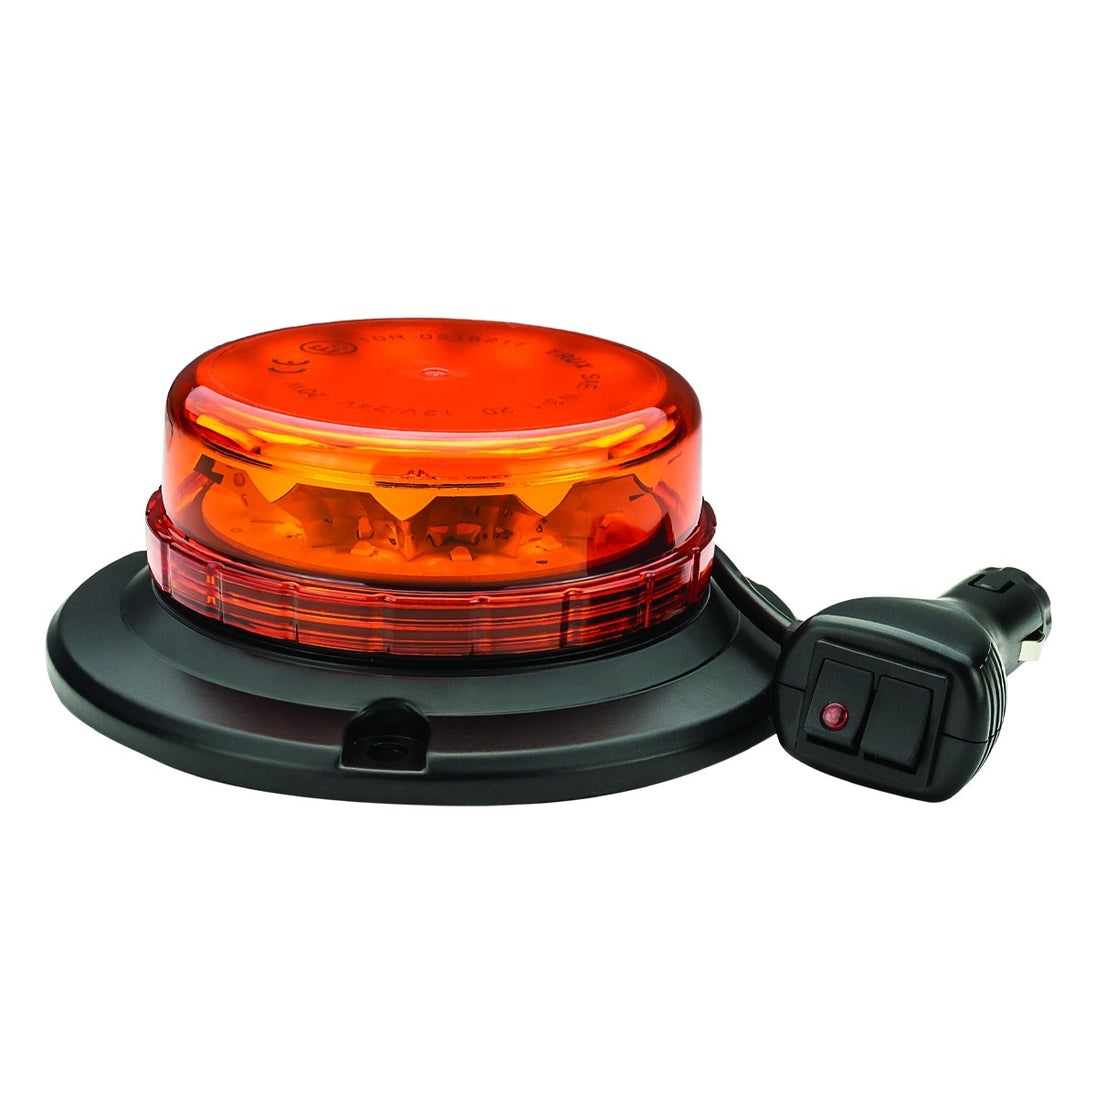 CLASS 1 BEACON LOW PROFILE LED WARNING LIGHT WITH 36 PATTERNS AND CIGARETTE PLUG WITH DUAL SWITCH